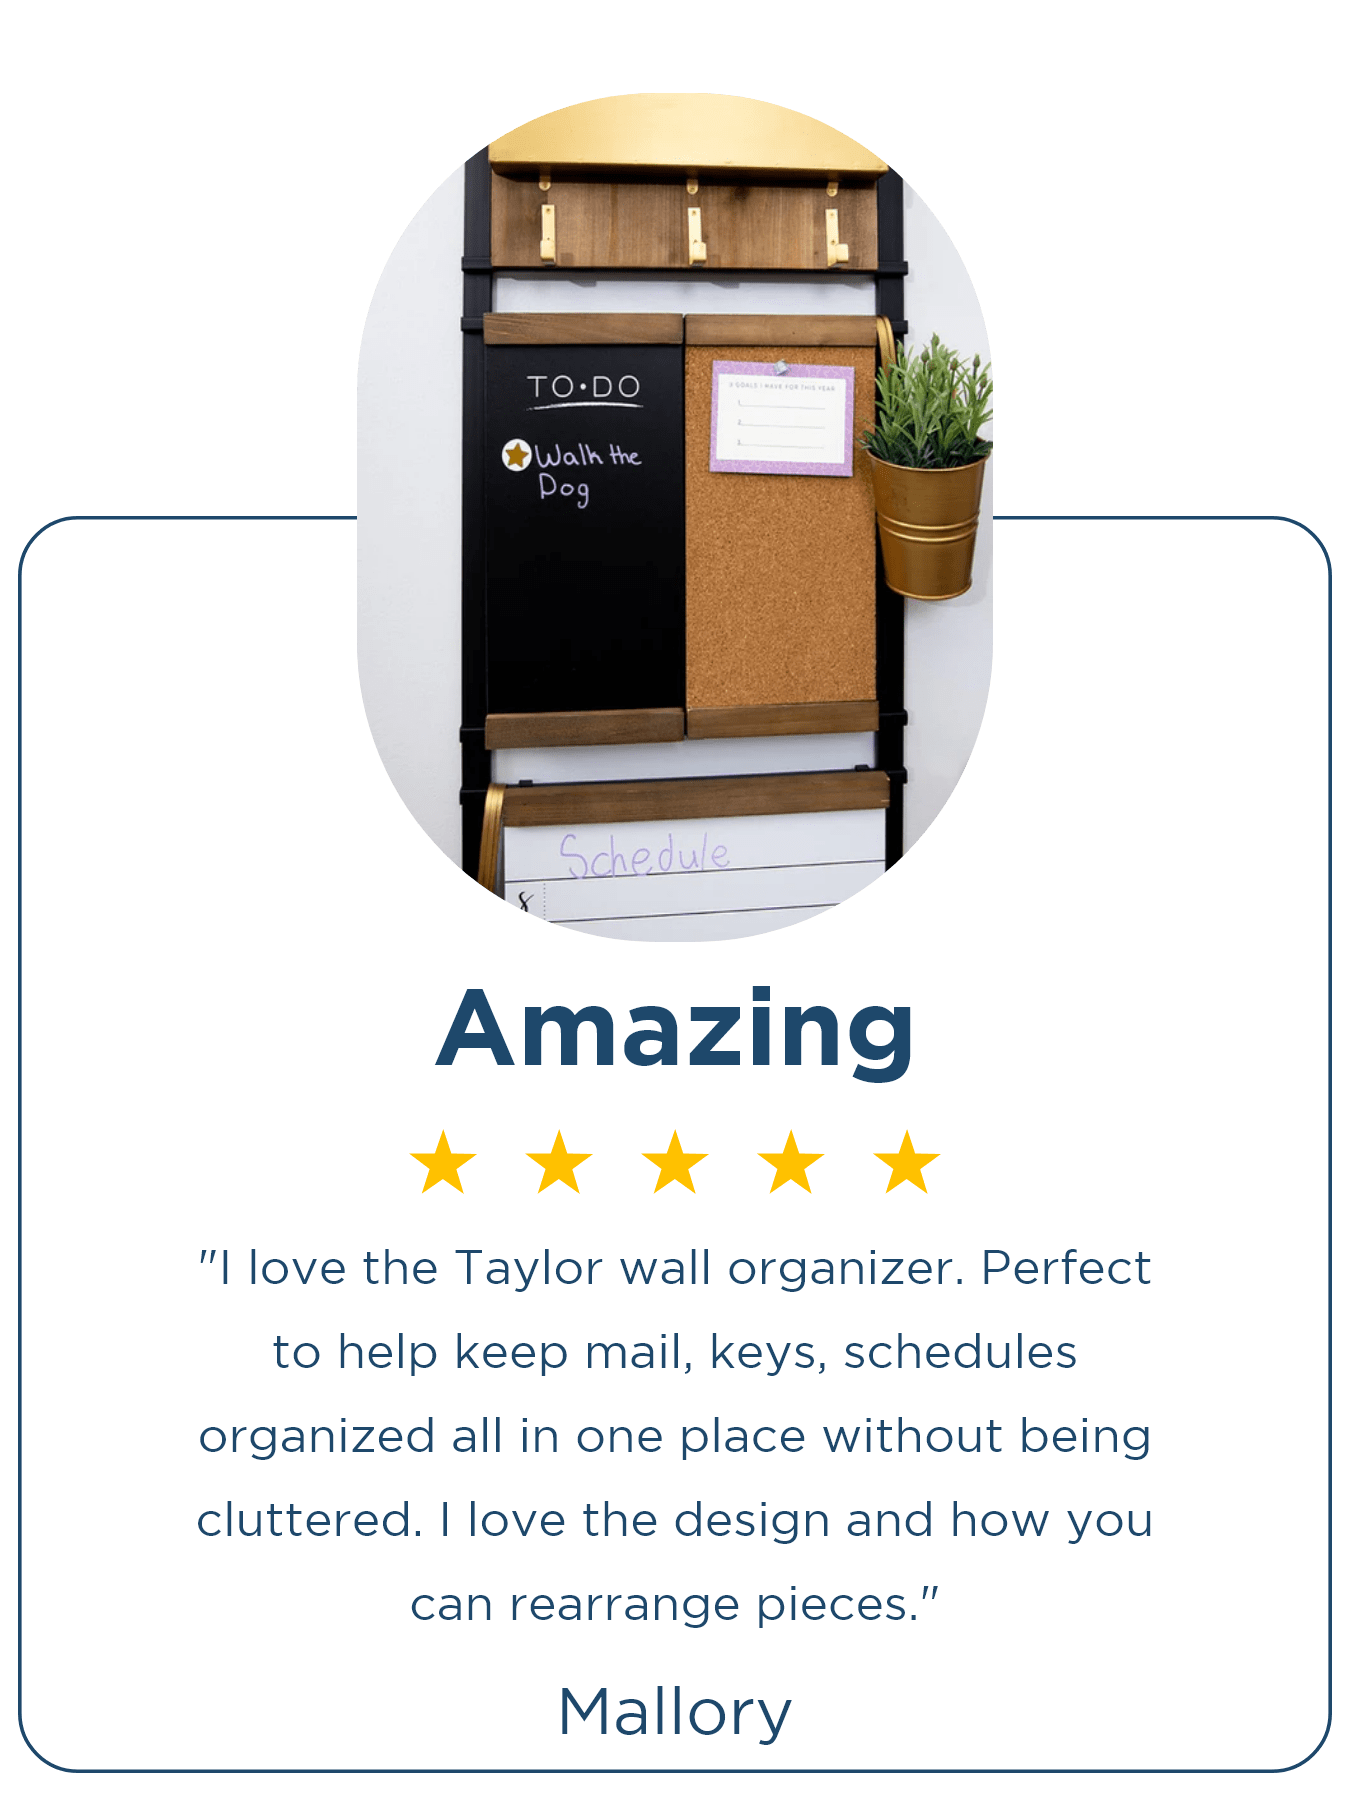 ⭐⭐⭐⭐⭐ Mallory | Amazing "I love the Taylor wall organizer. Perfect to help keep mail, keys, schedules organized all in one place without being cluttered. I love the design and how you can rearrange pieces."